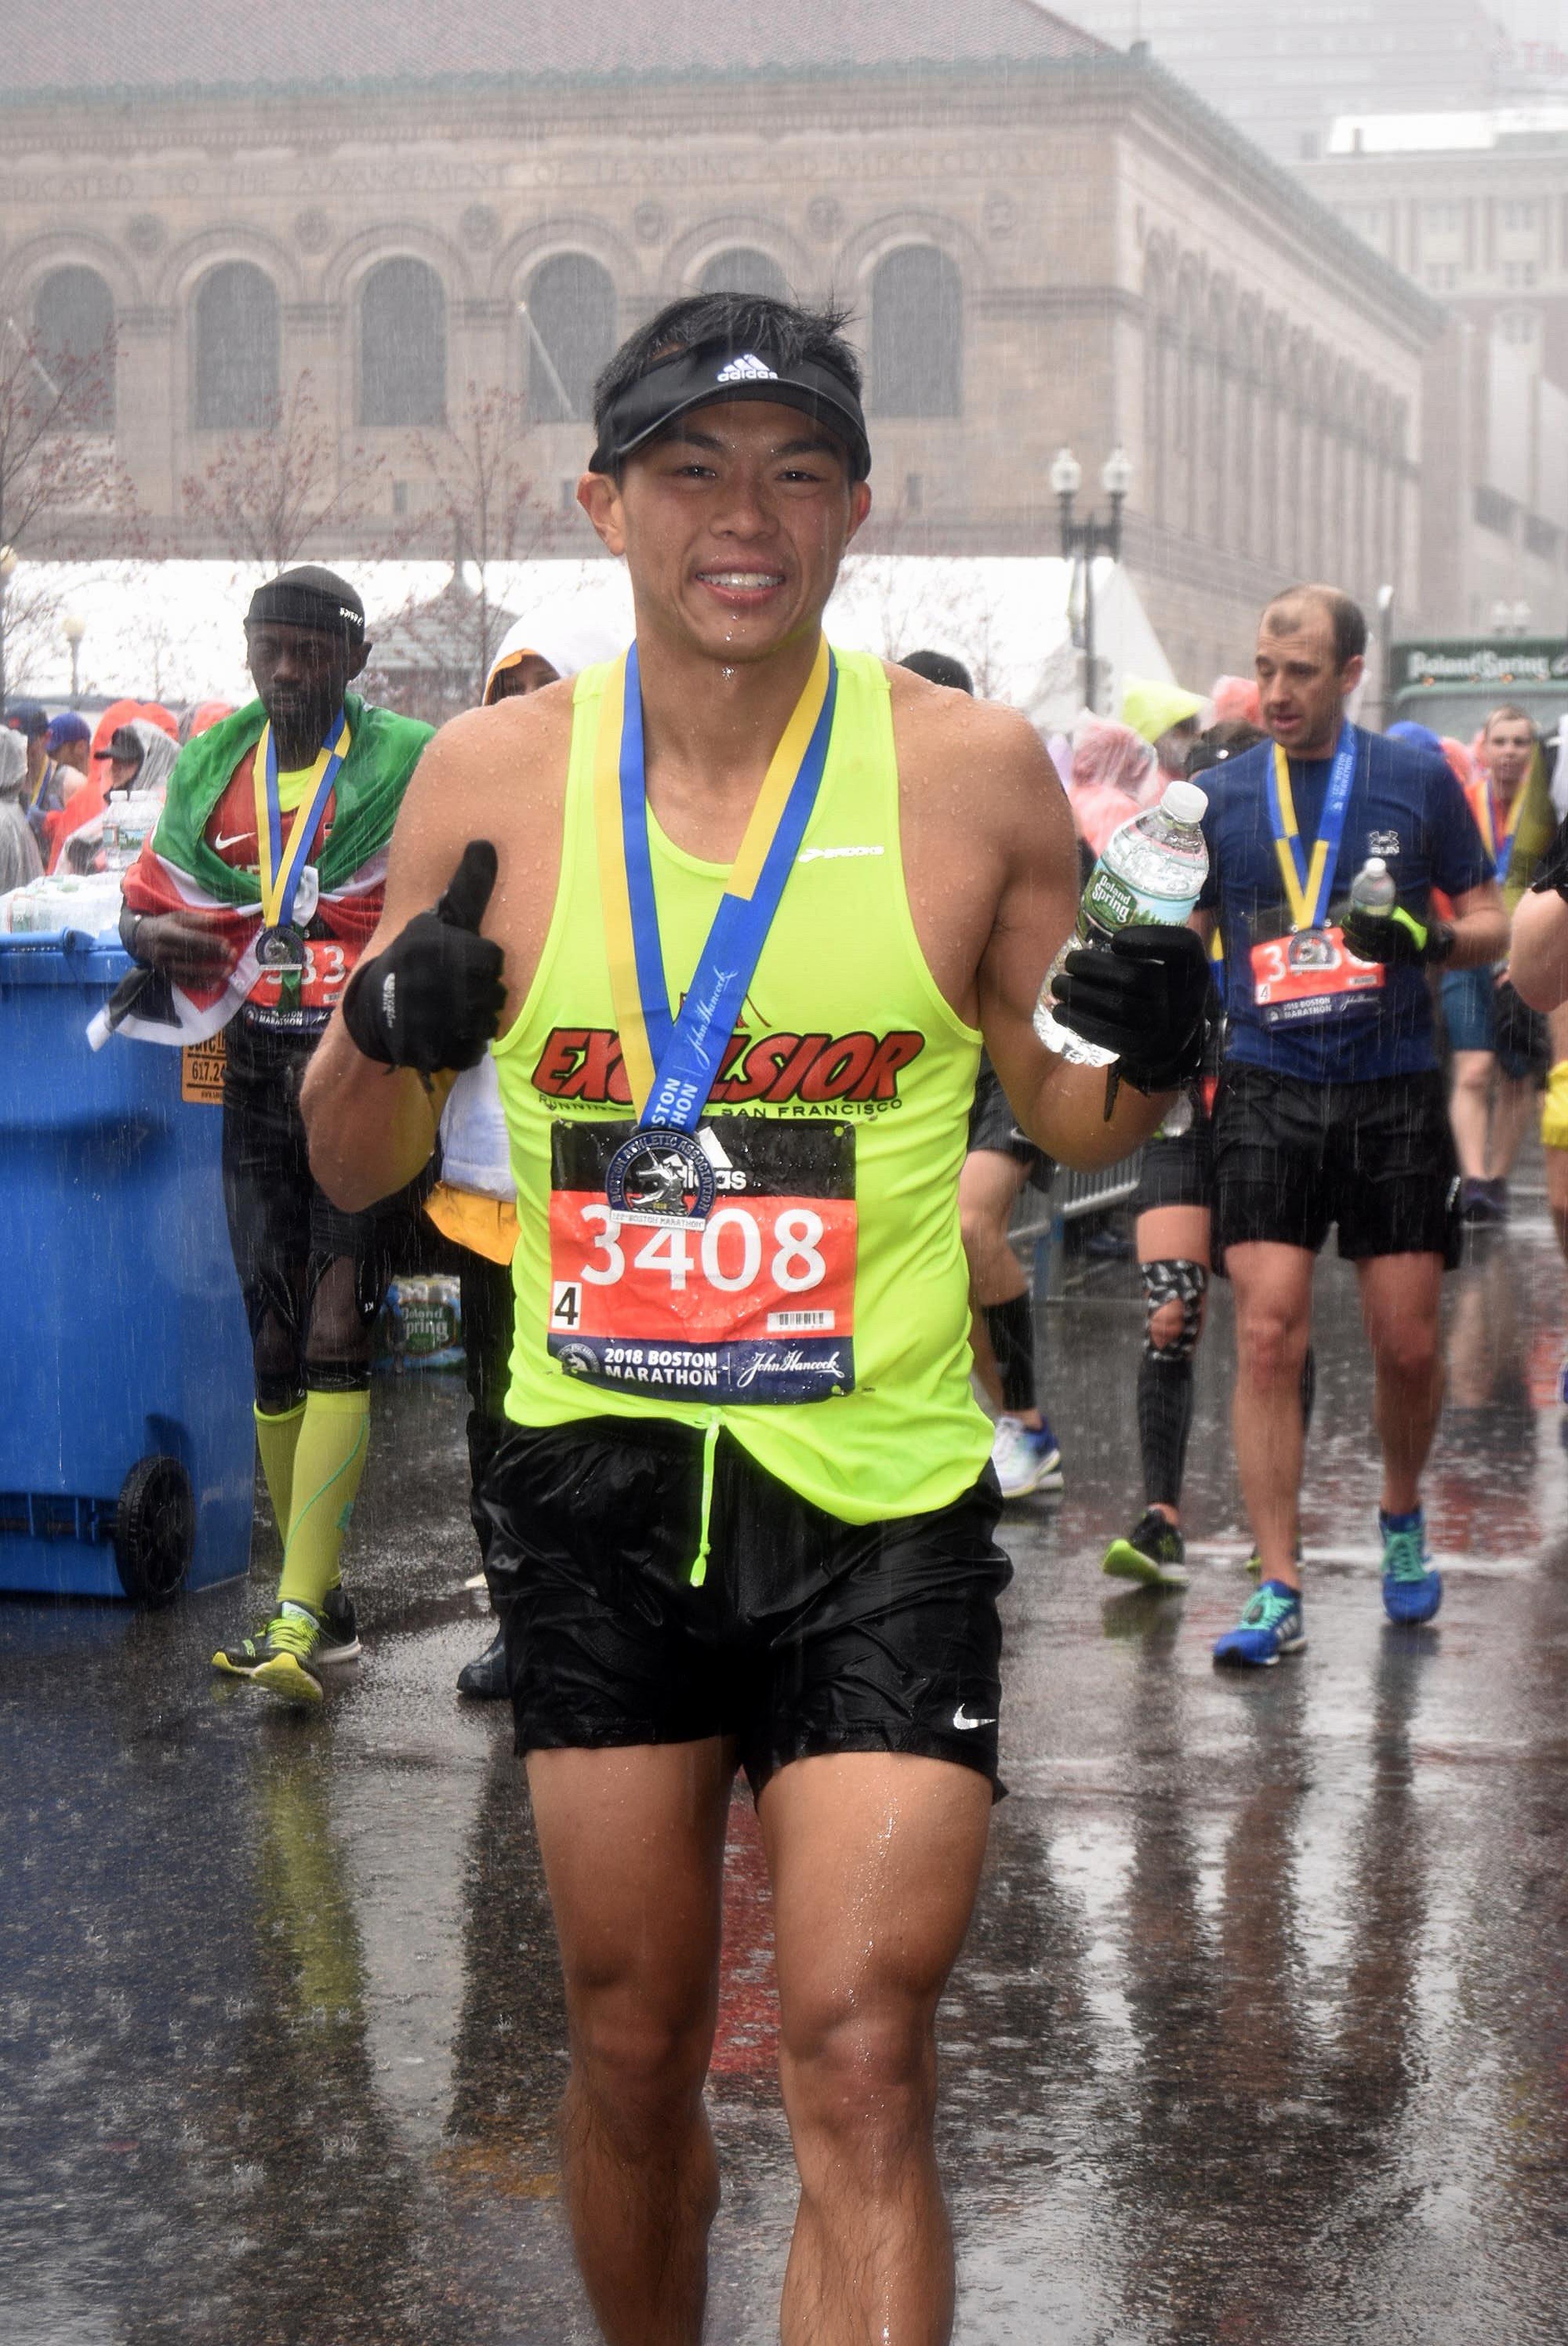 Very, very happy to be done at the finish line of the Boston Marathon